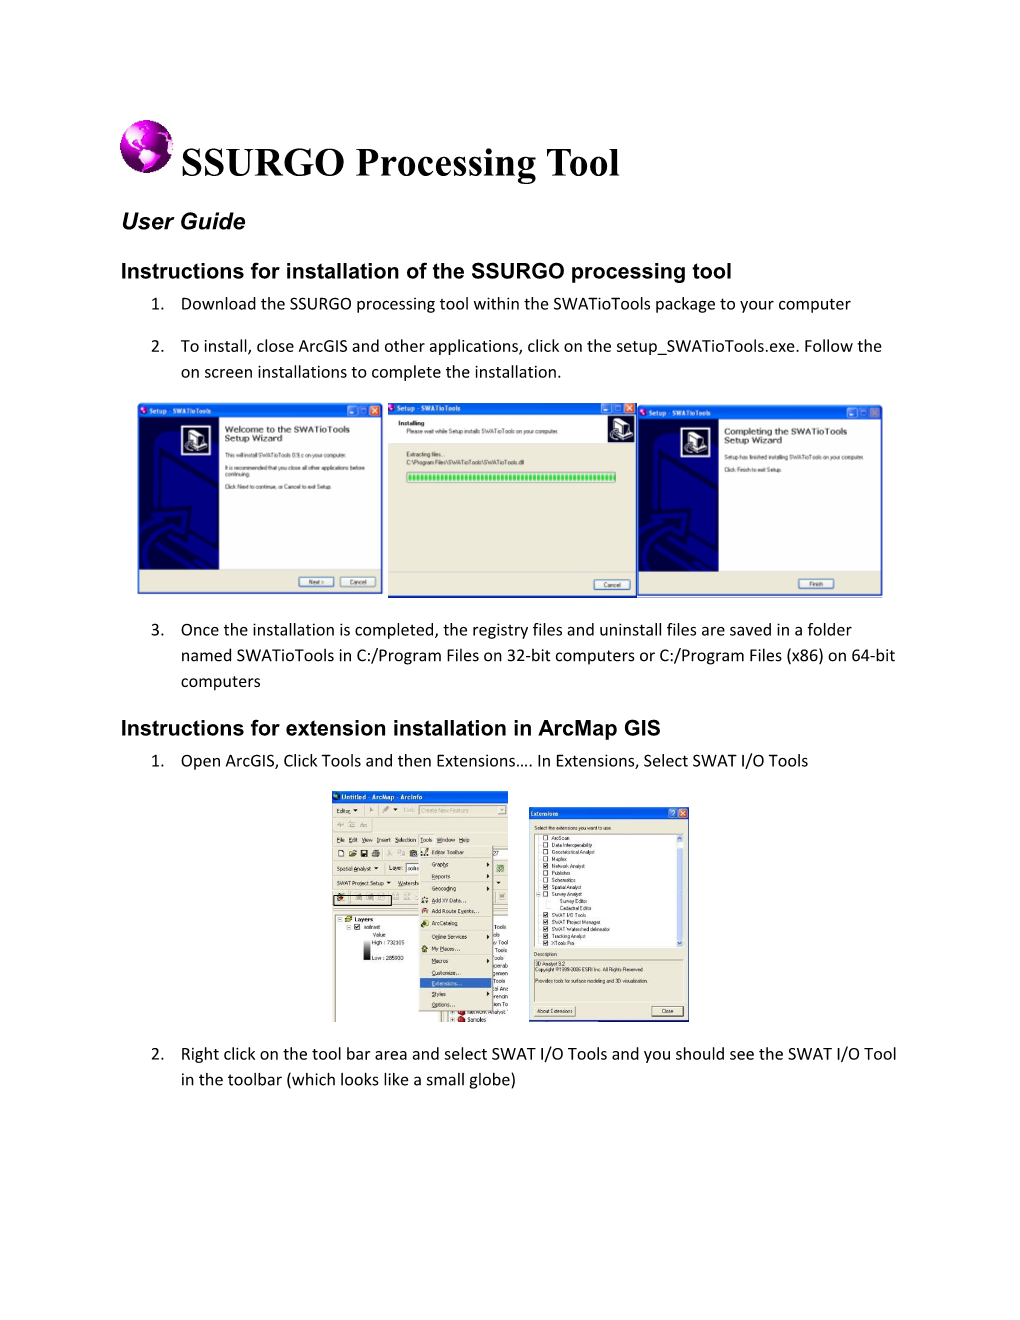 Instructions for Installation of the SSURGO Processing Tool